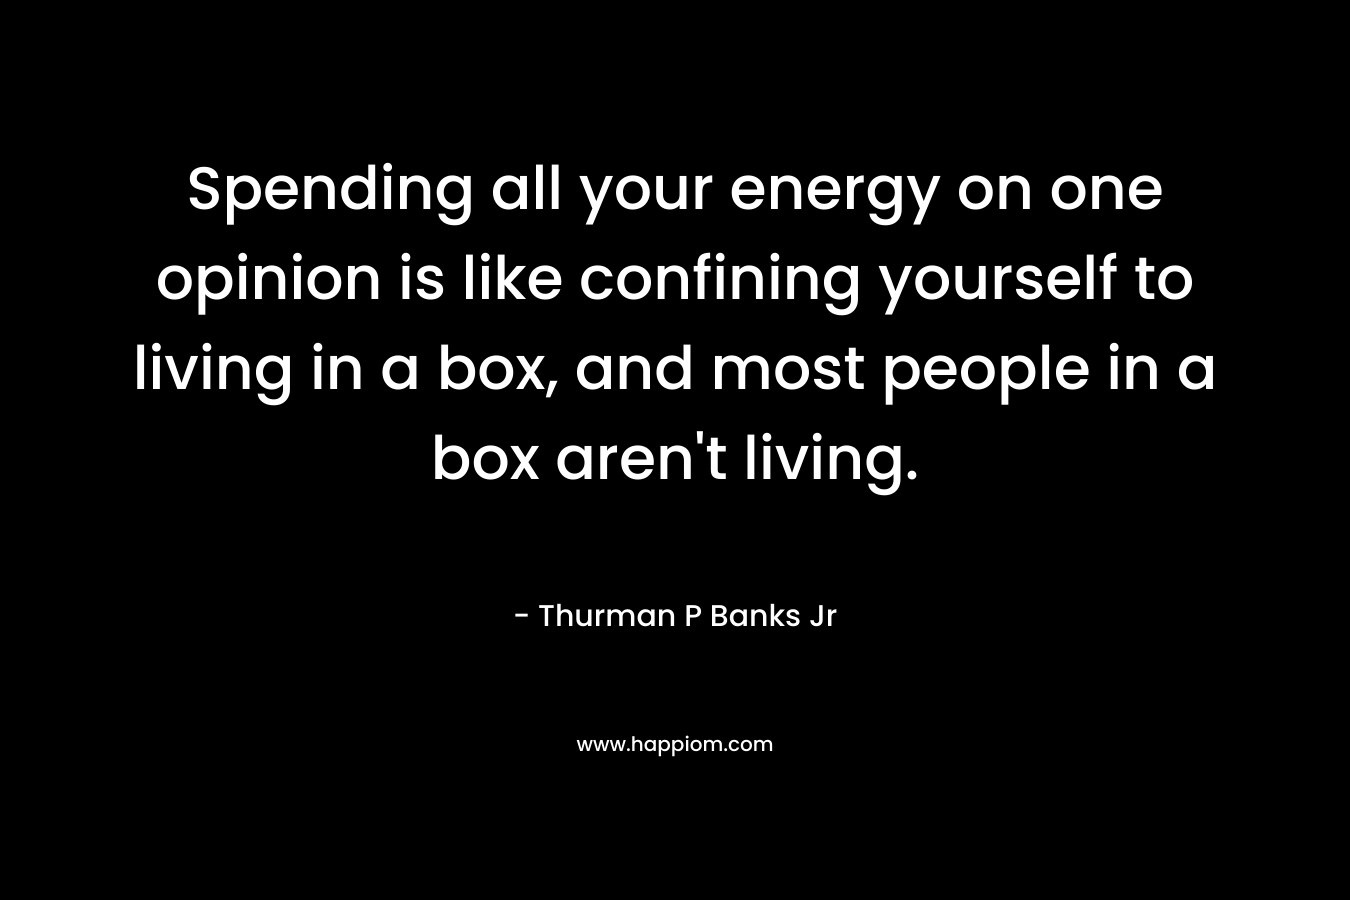 Spending all your energy on one opinion is like confining yourself to living in a box, and most people in a box aren't living.